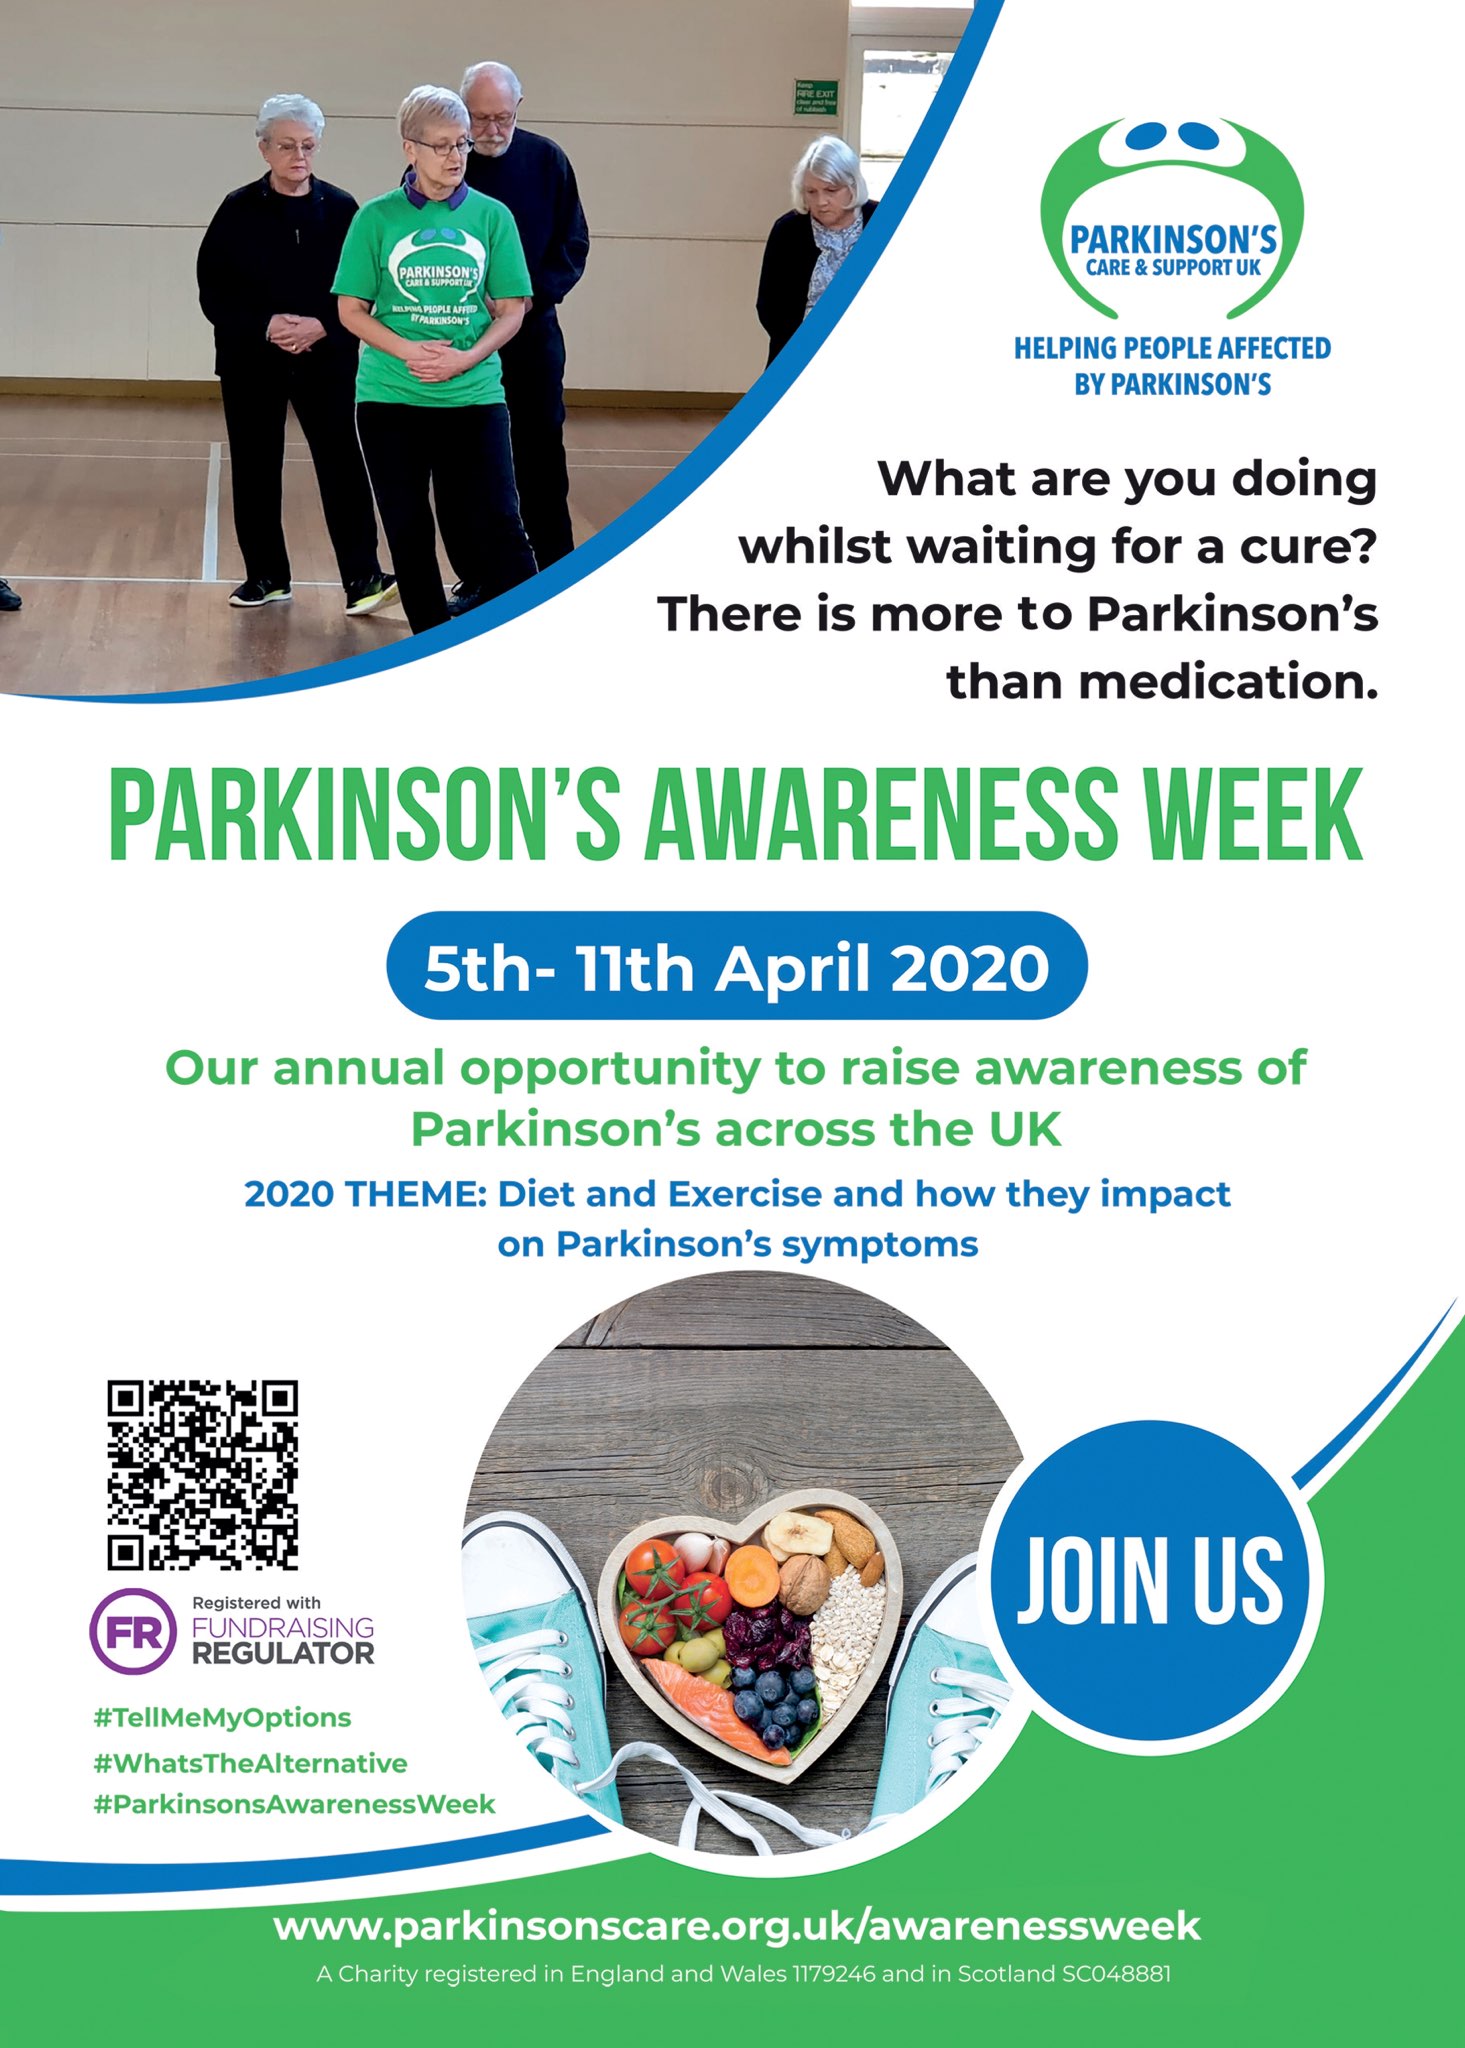 Awareness Week Parkinson’s Care and Support UK